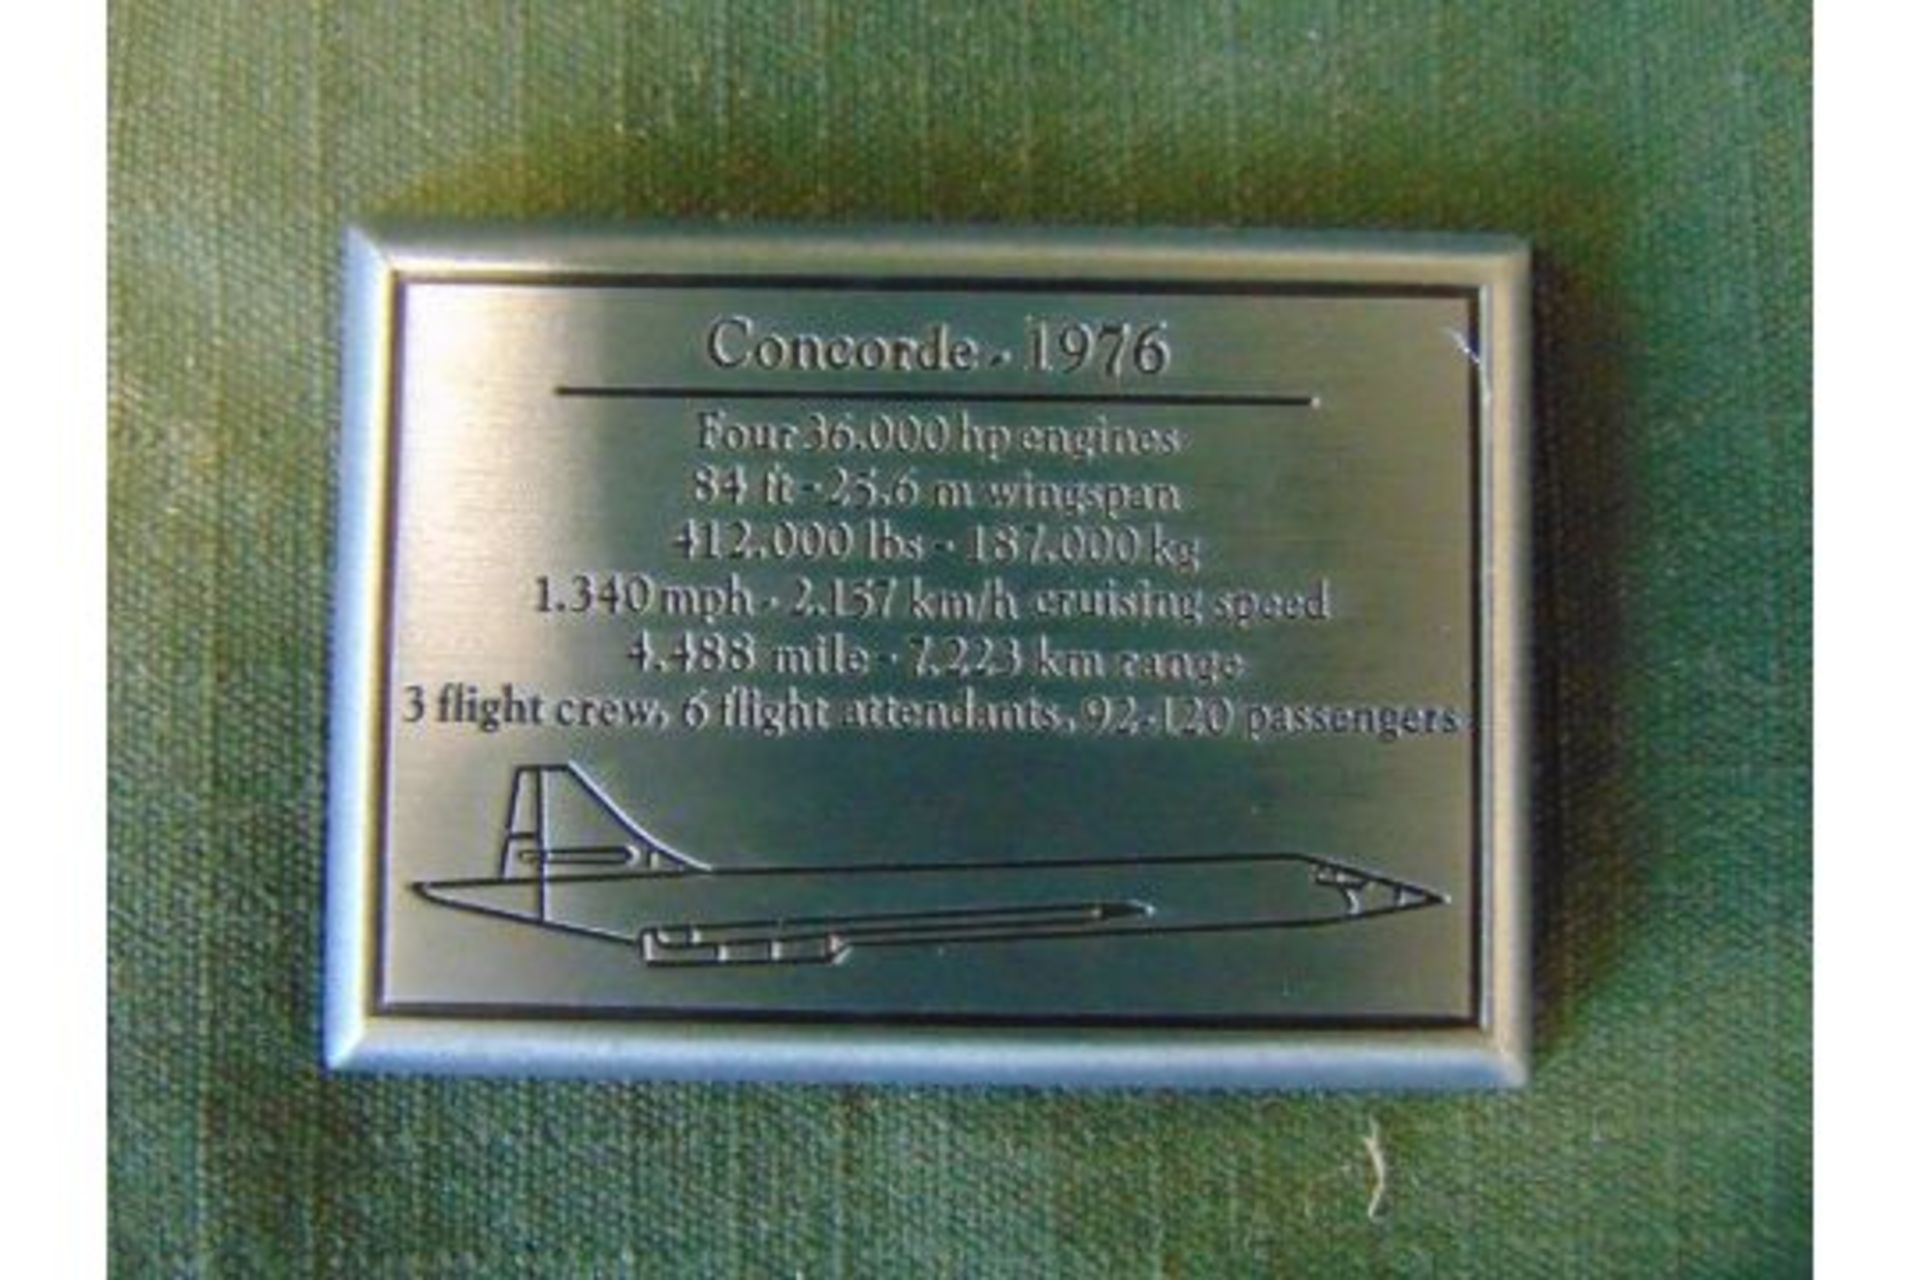 NEW JUST LANDED Large Aluminium Concorde Model - Image 14 of 14